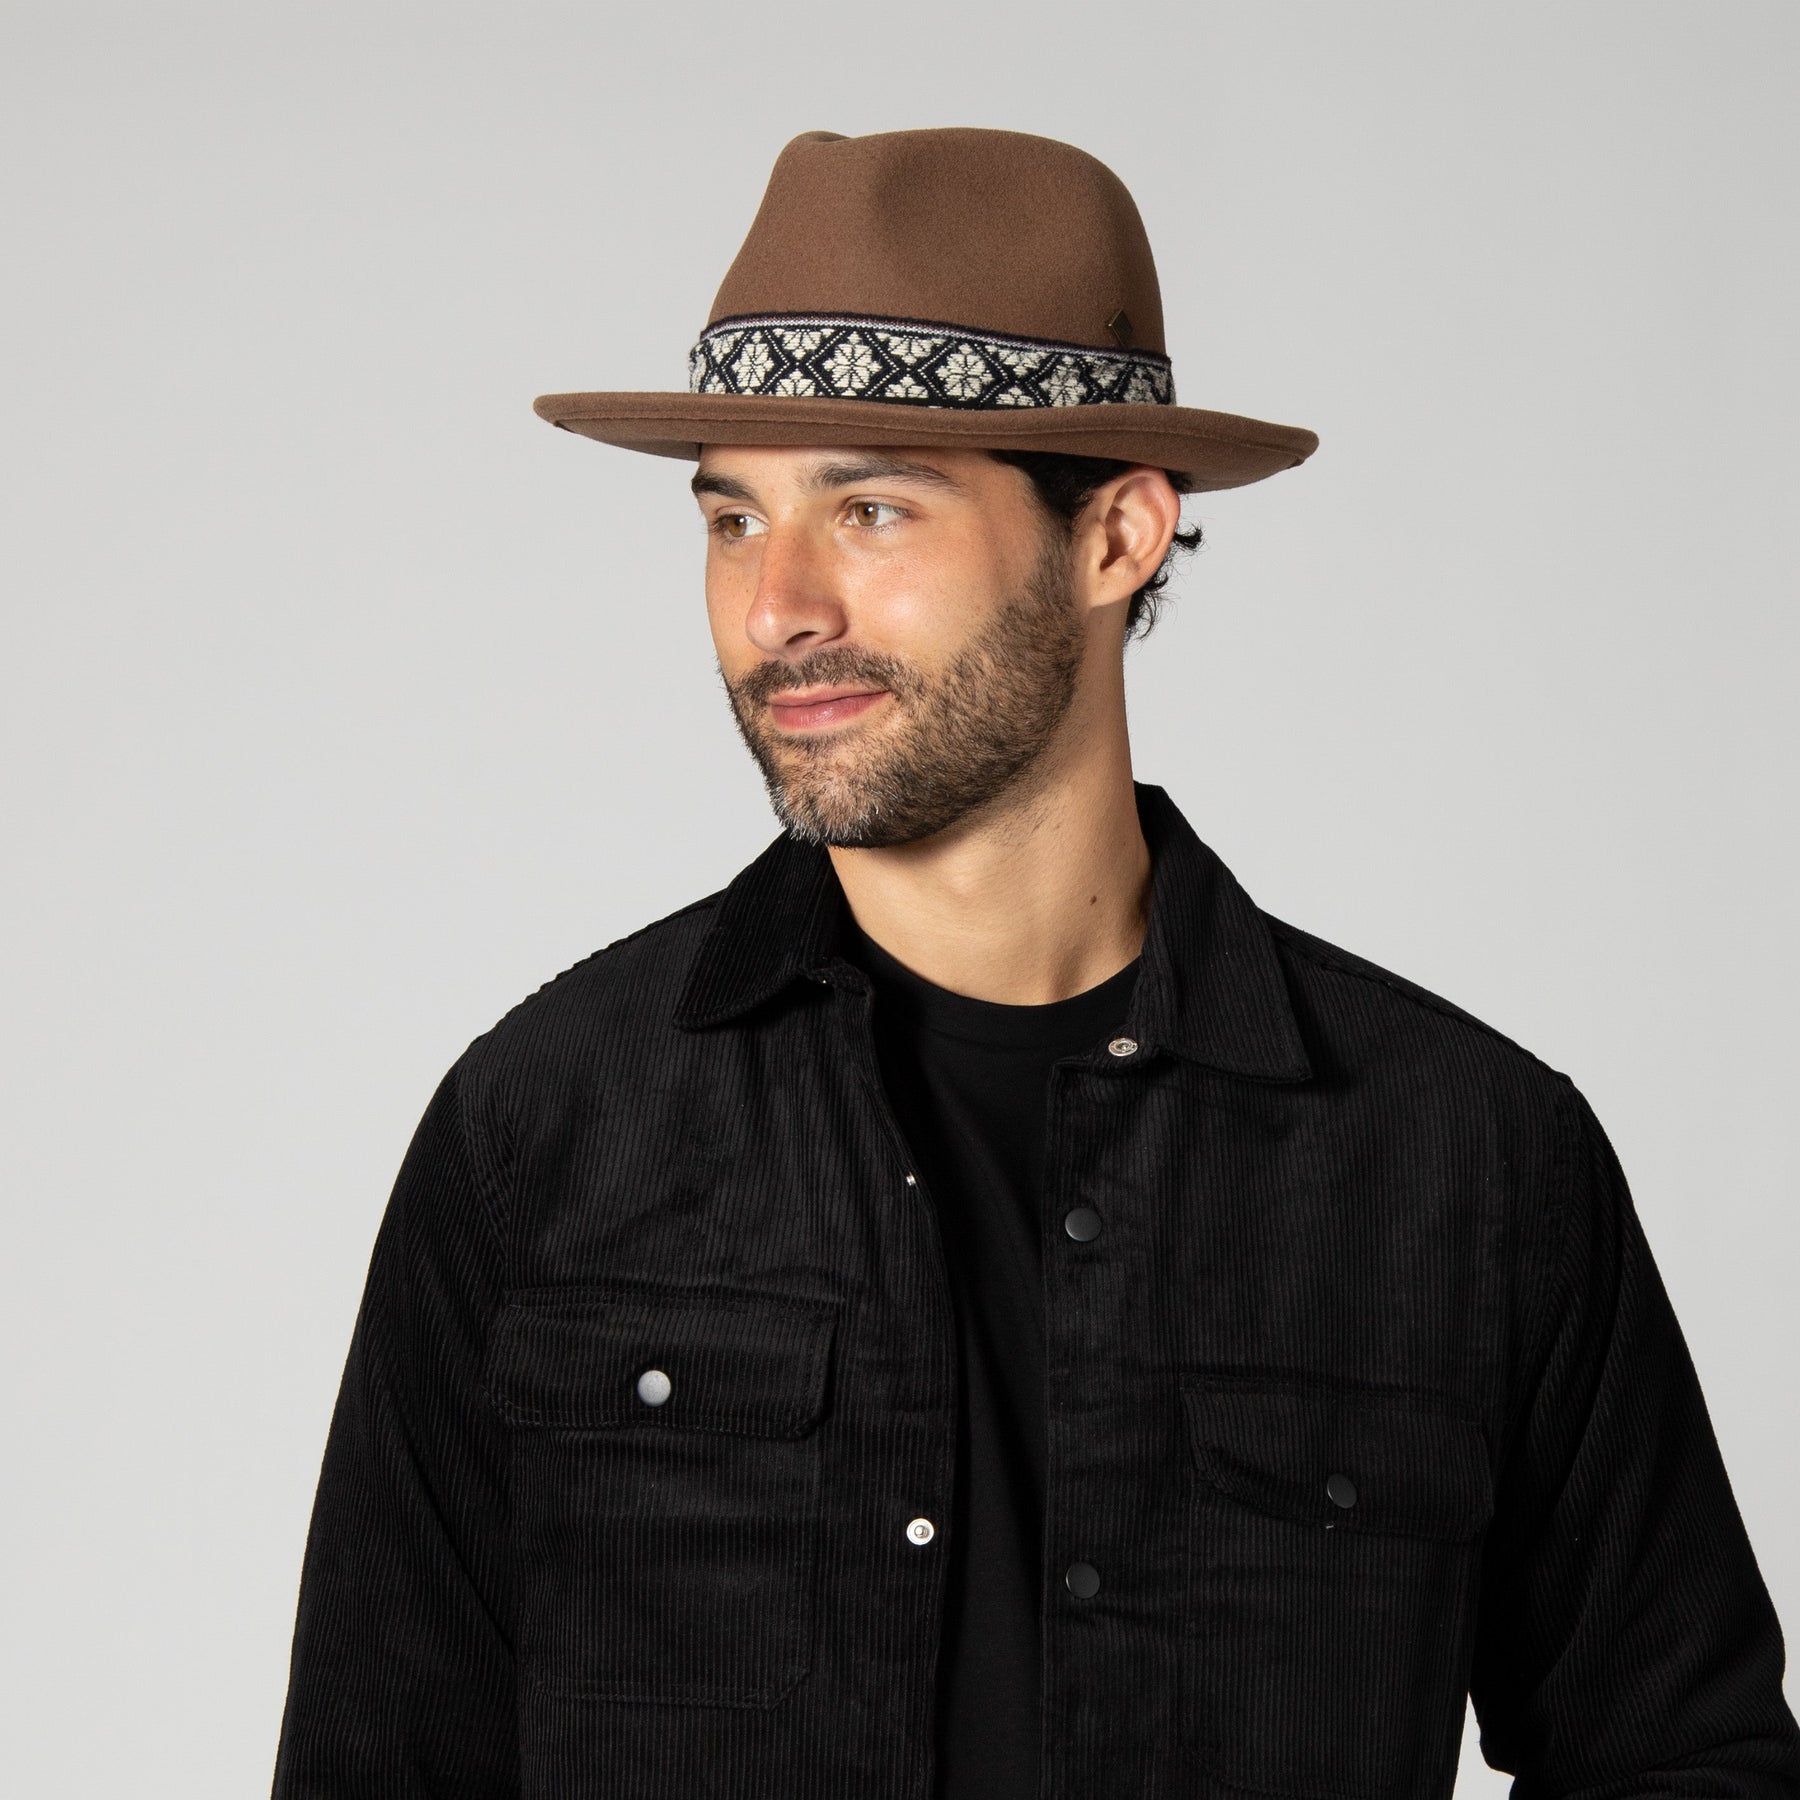 Men's Wool Felt Fedora With Textured Jacquard Band – San Diego Hat Company